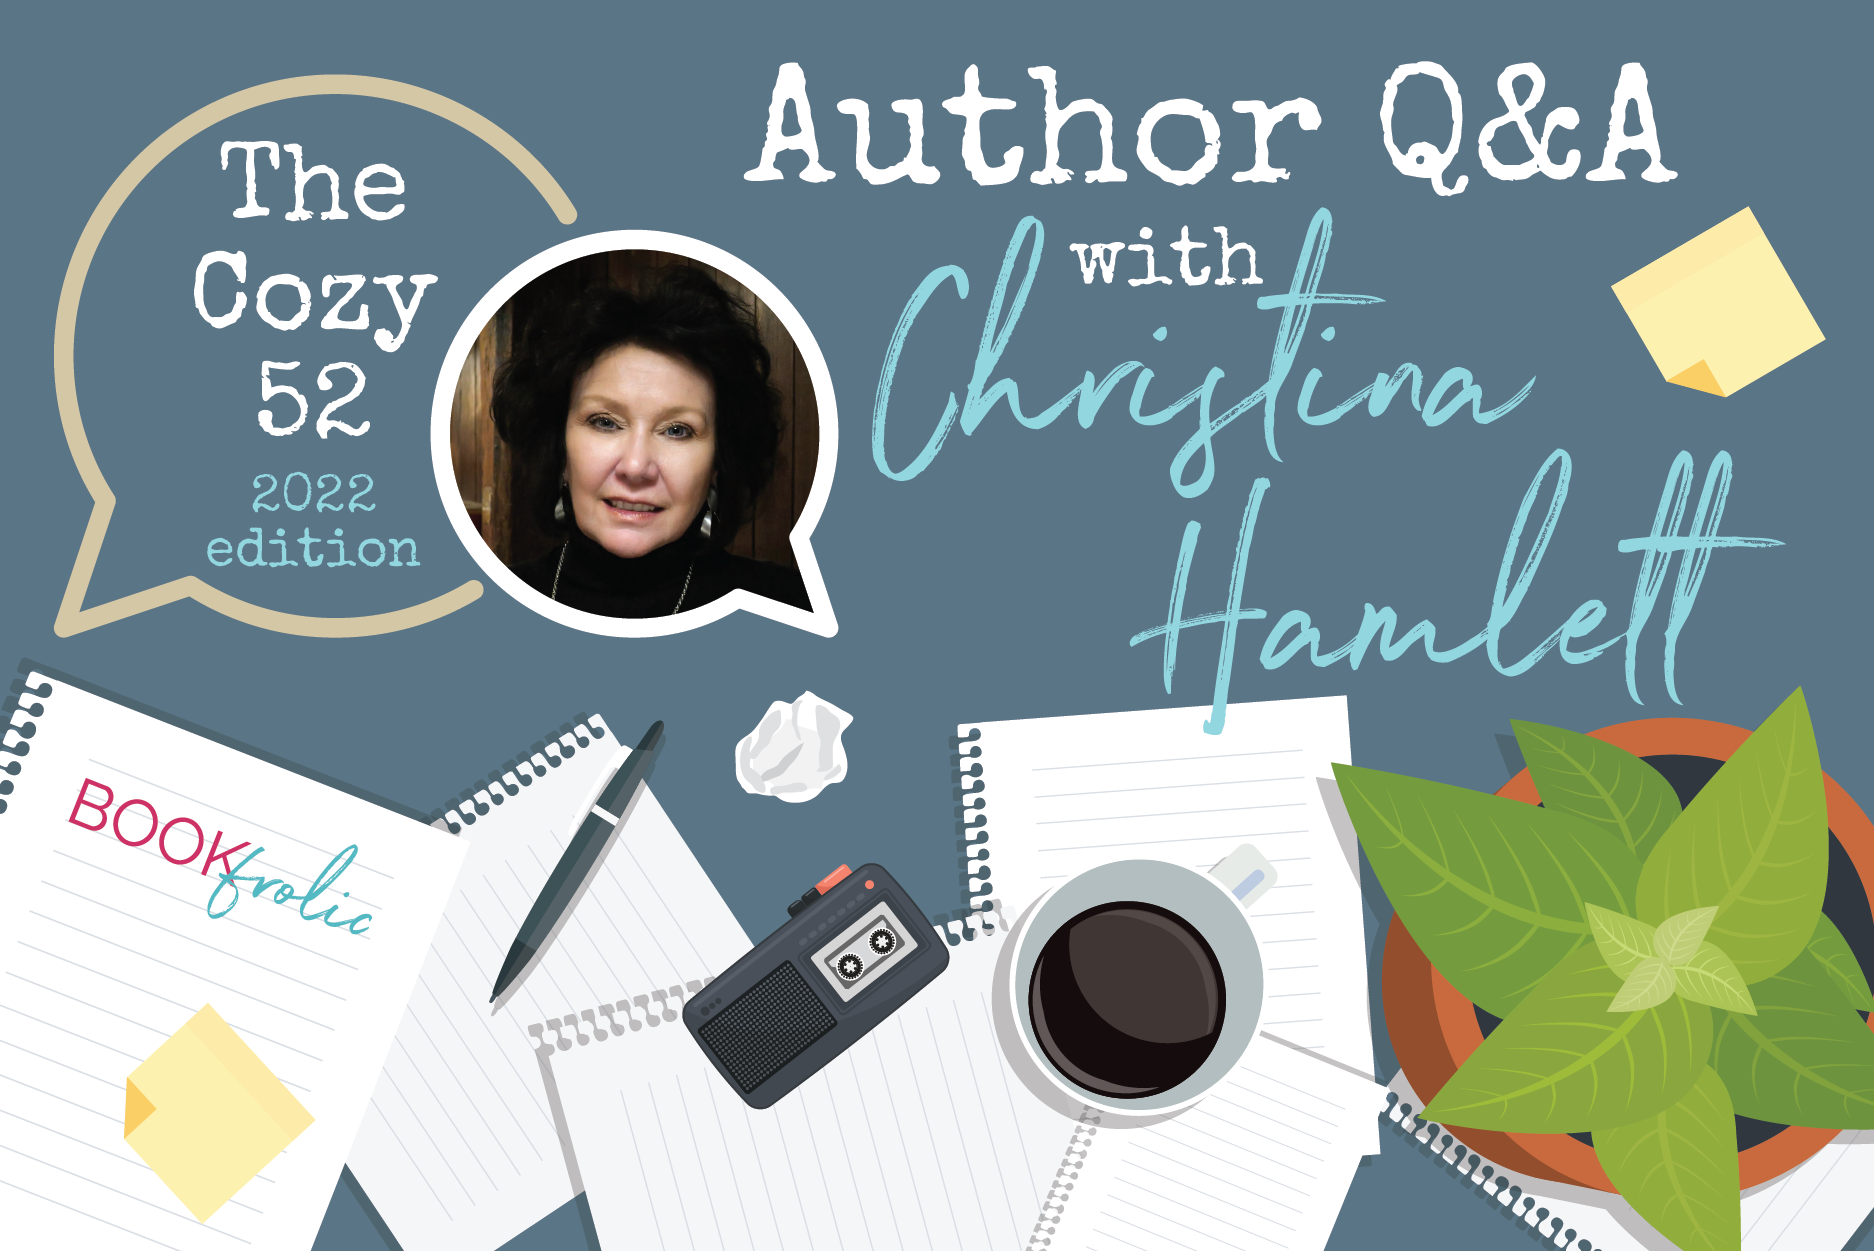 feature banner for author interview with Christina Hamlett